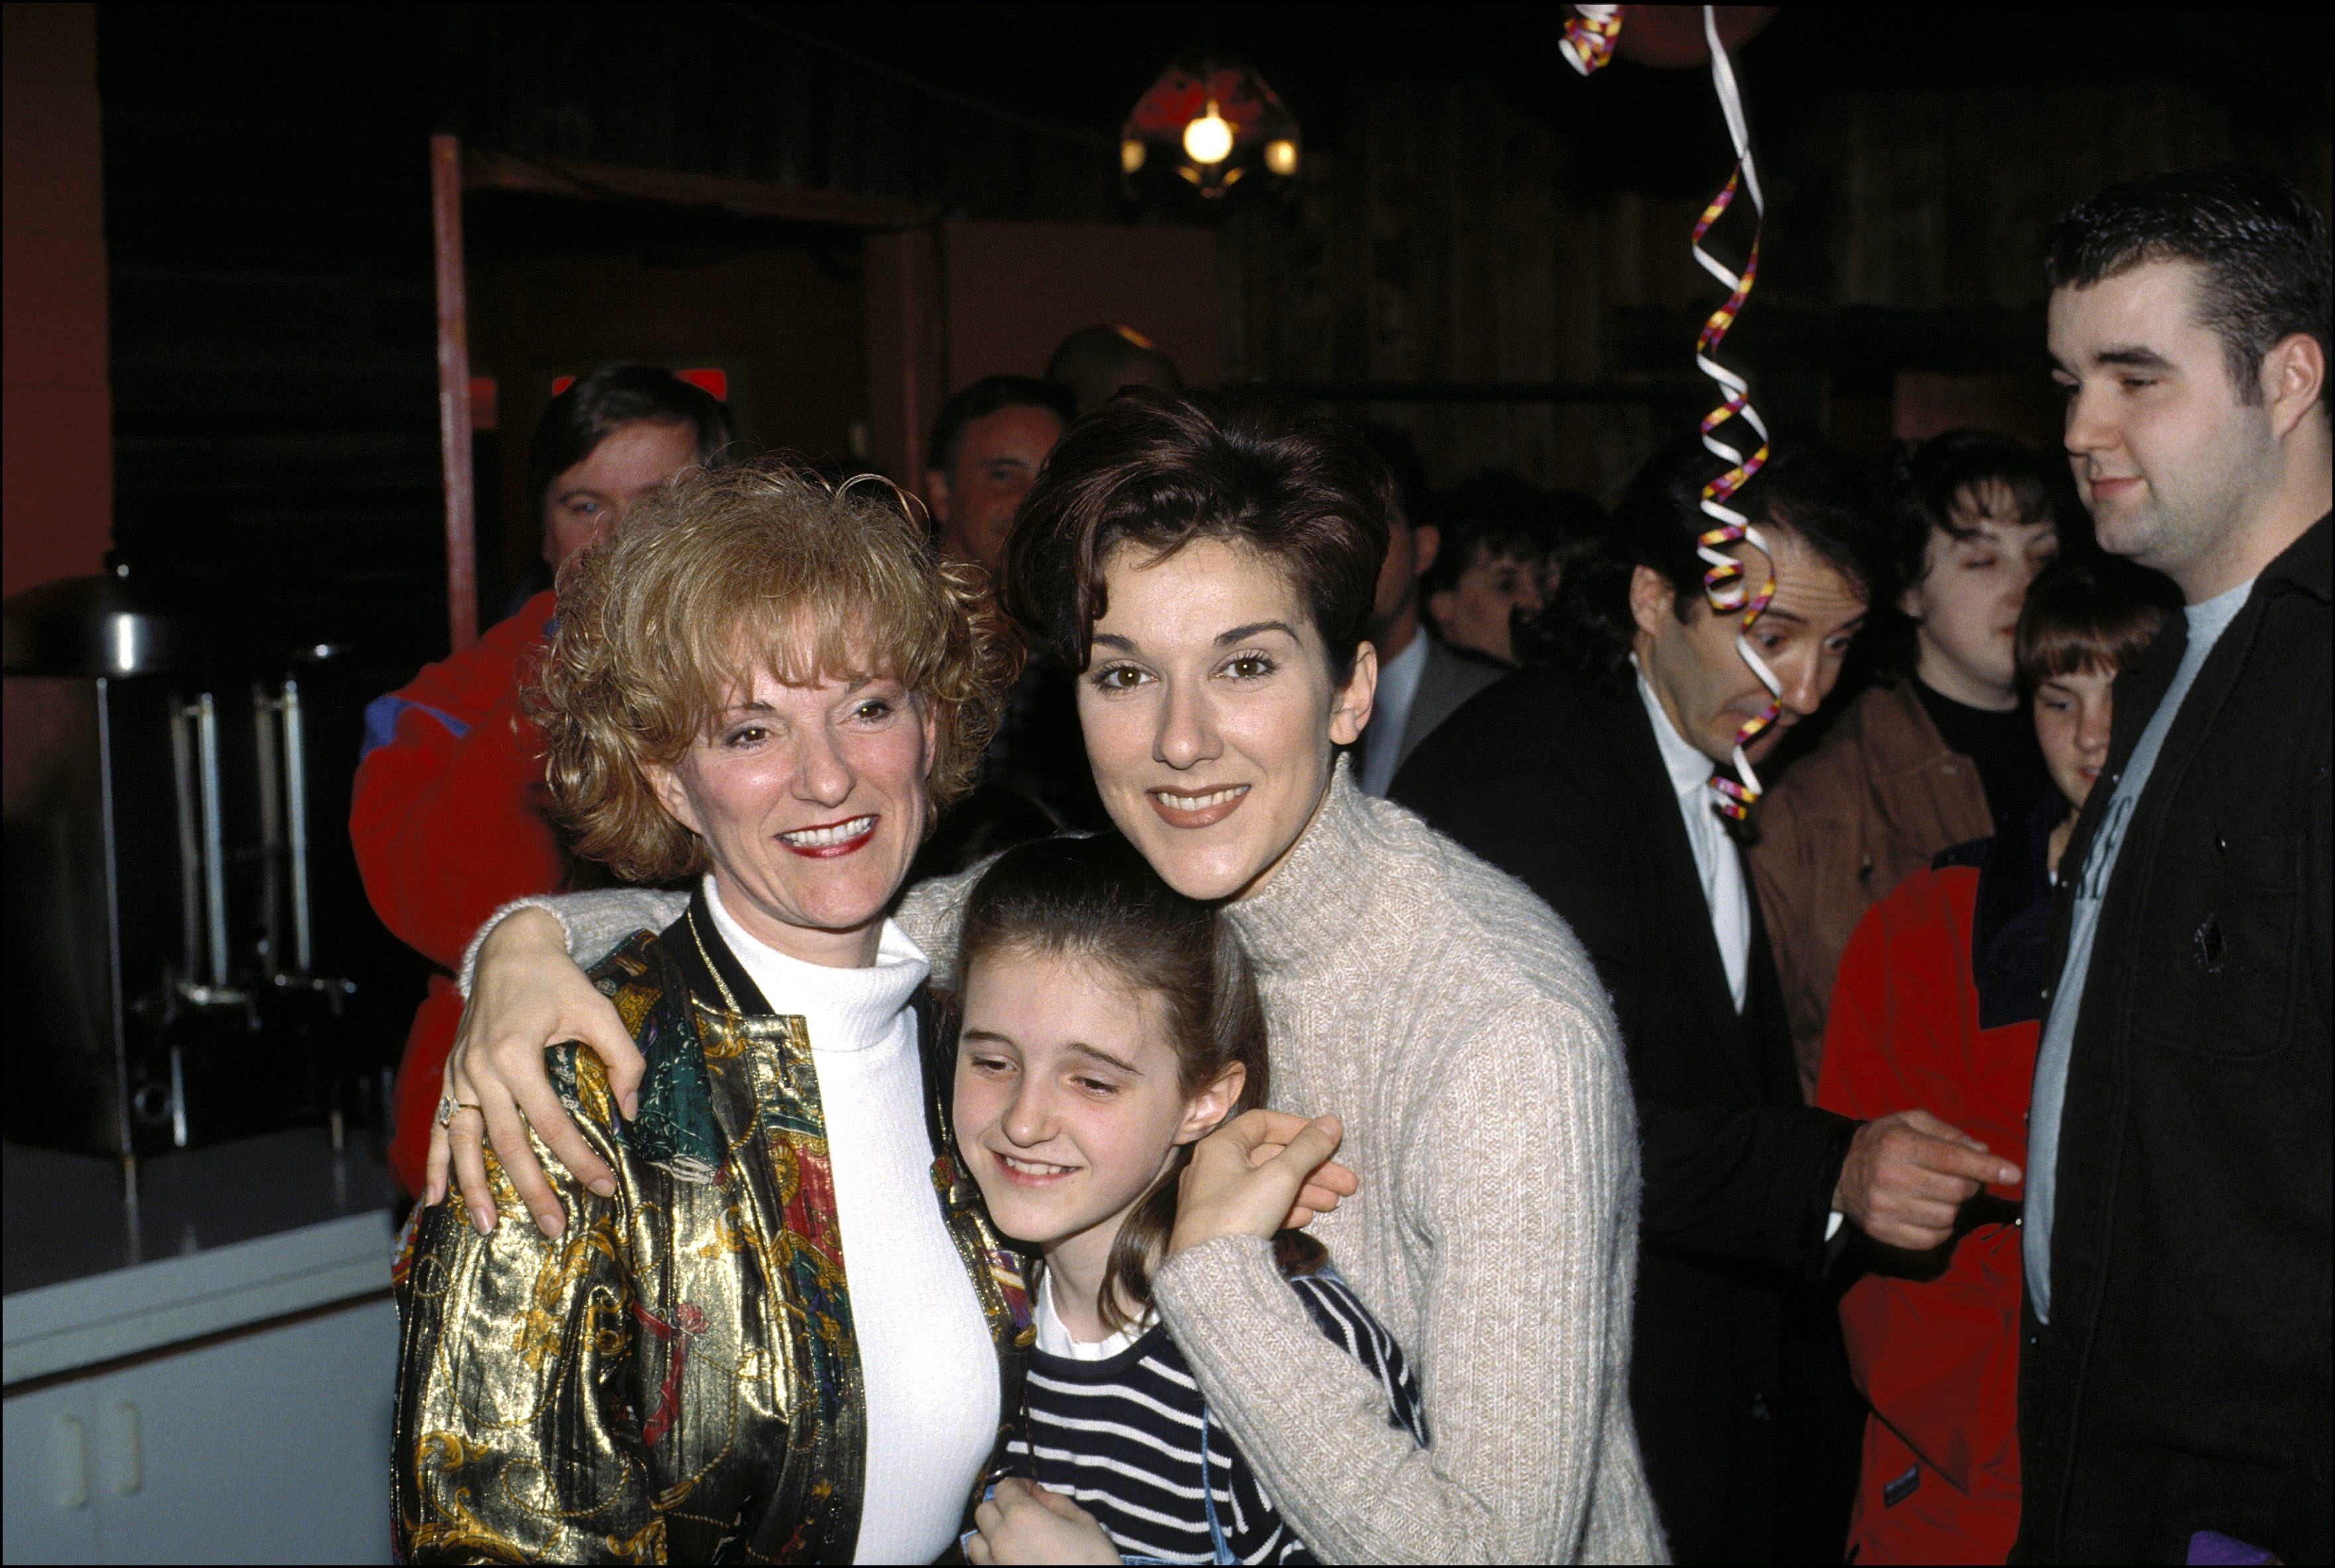 Celine Dion celebrates her 27th anniversary with her sister Claudette in Canada on March 31, 1995 | Source: Getty Images